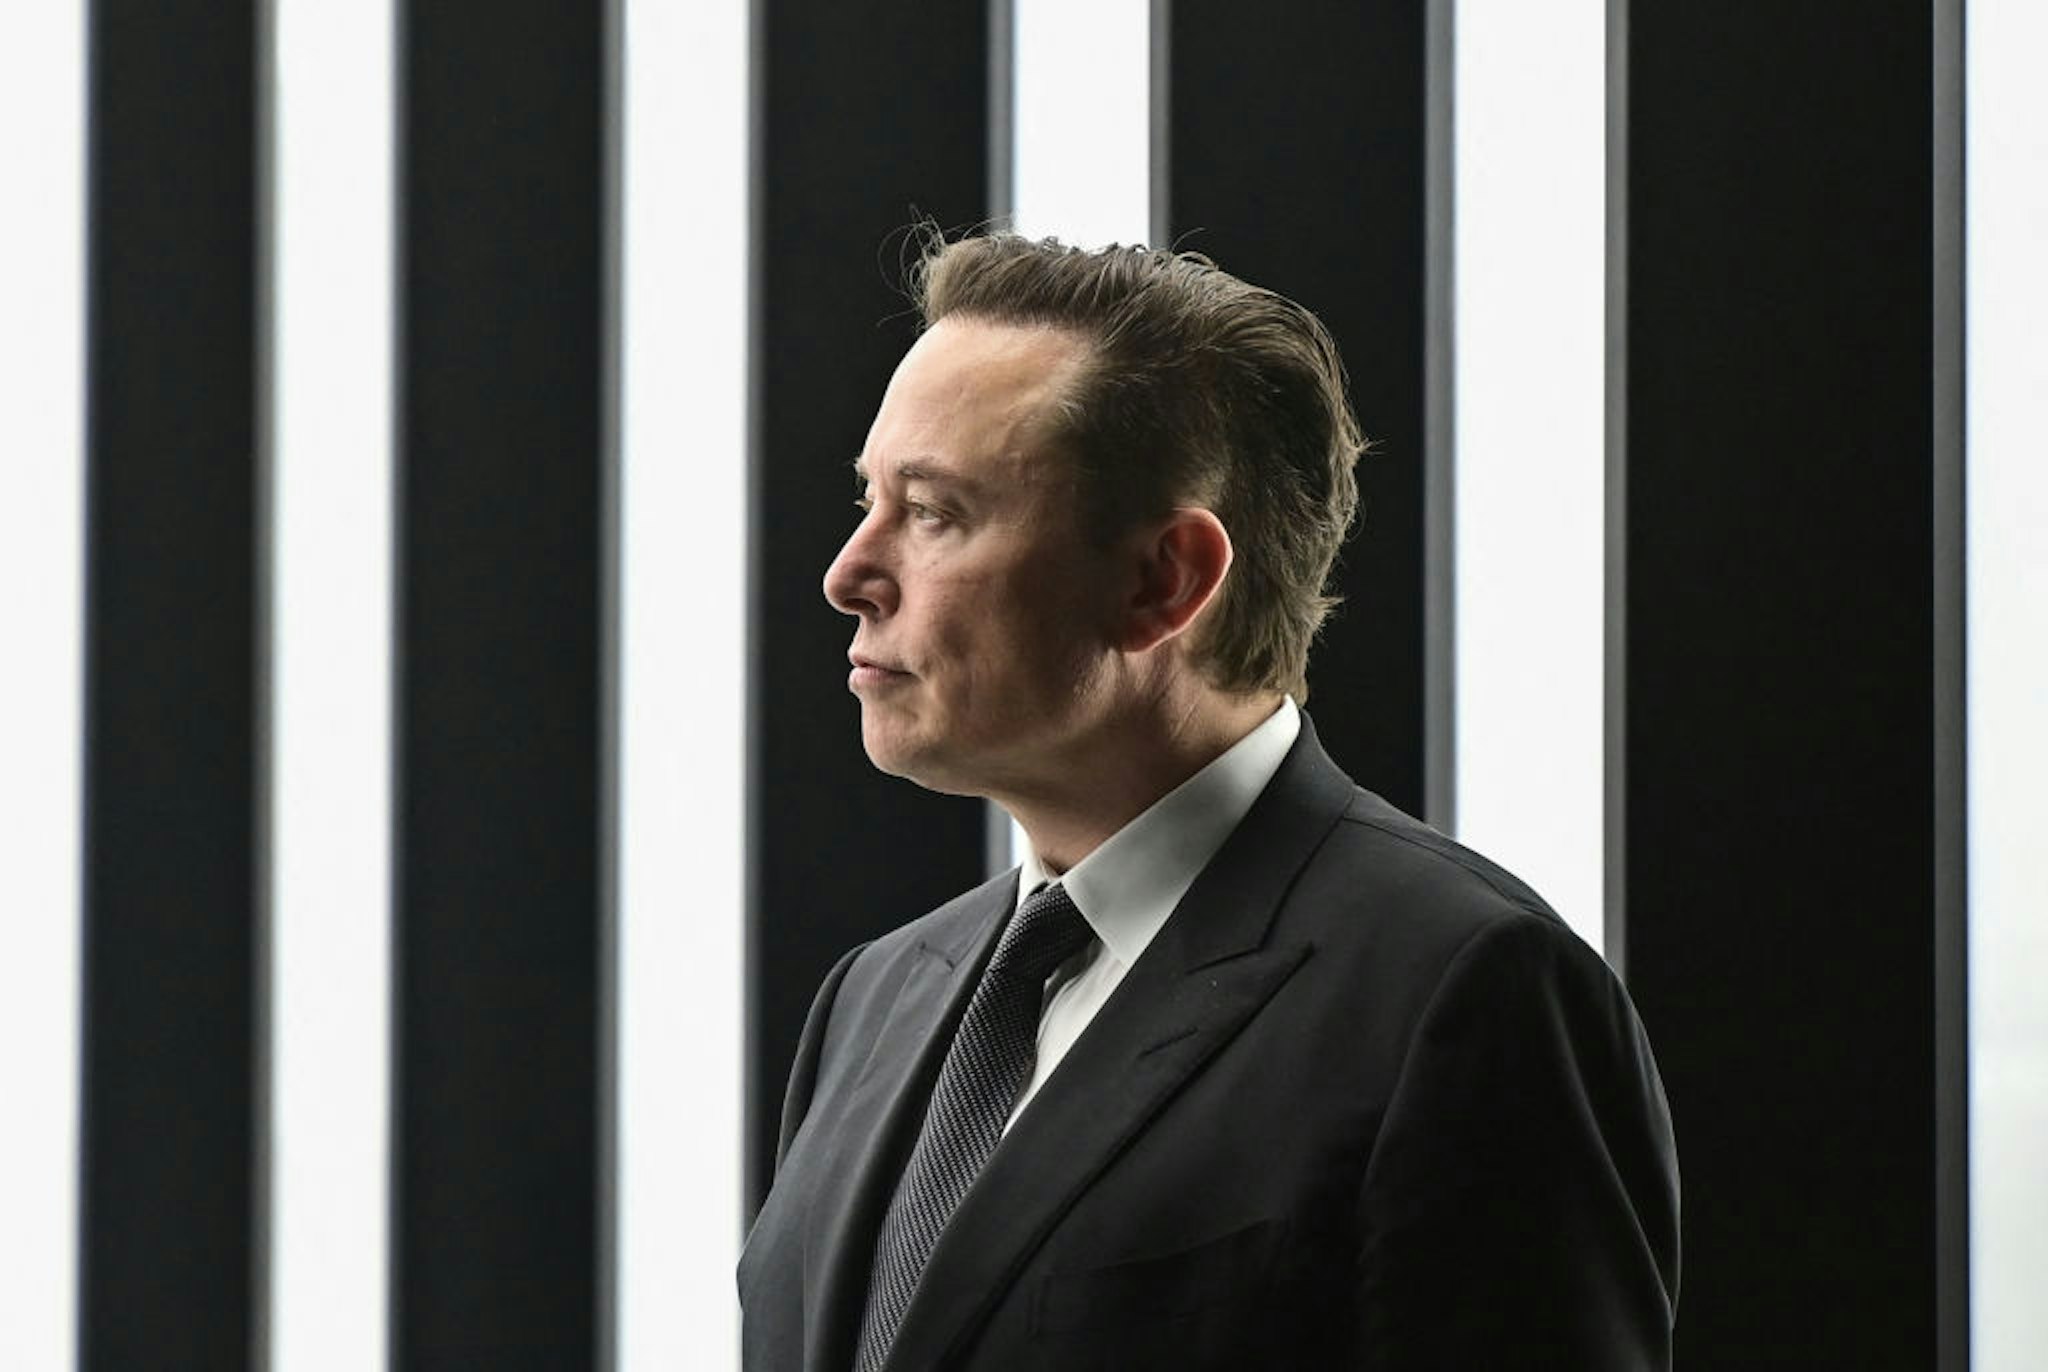 Tesla CEO Elon Musk is pictured as he attends the start of the production at Tesla's "Gigafactory" on March 22, 2022 in Gruenheide, southeast of Berlin. - US electric car pioneer Tesla received the go-ahead for its "gigafactory" in Germany on March 4, 2022, paving the way for production to begin shortly after an approval process dogged by delays and setbacks. (Photo by Patrick Pleul / POOL / AFP)